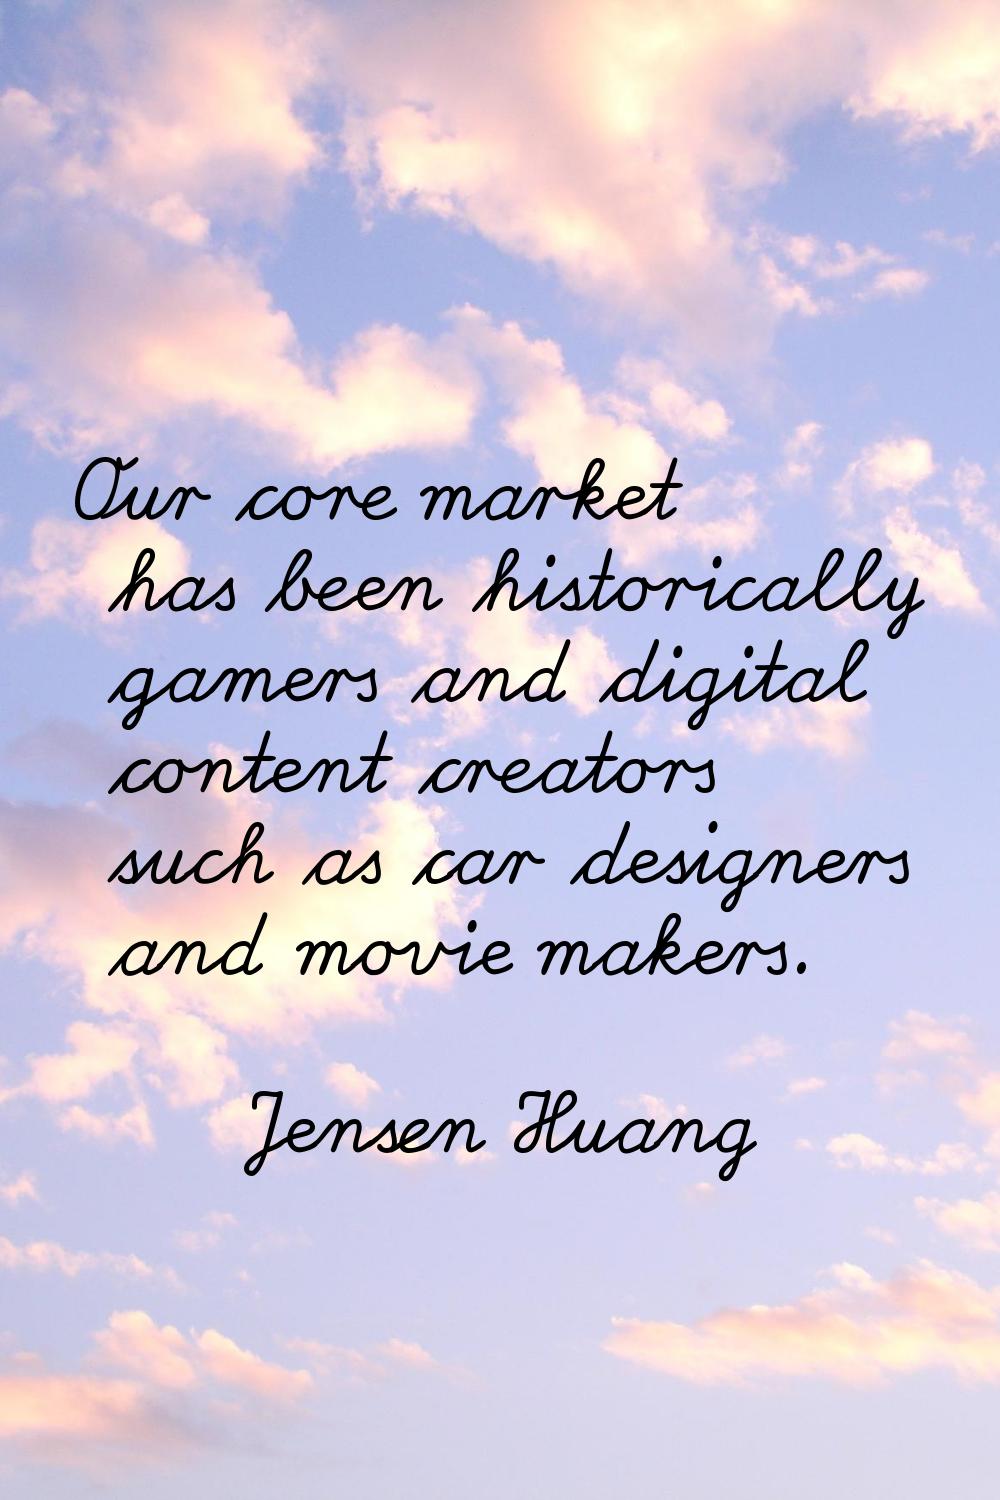 Our core market has been historically gamers and digital content creators such as car designers and